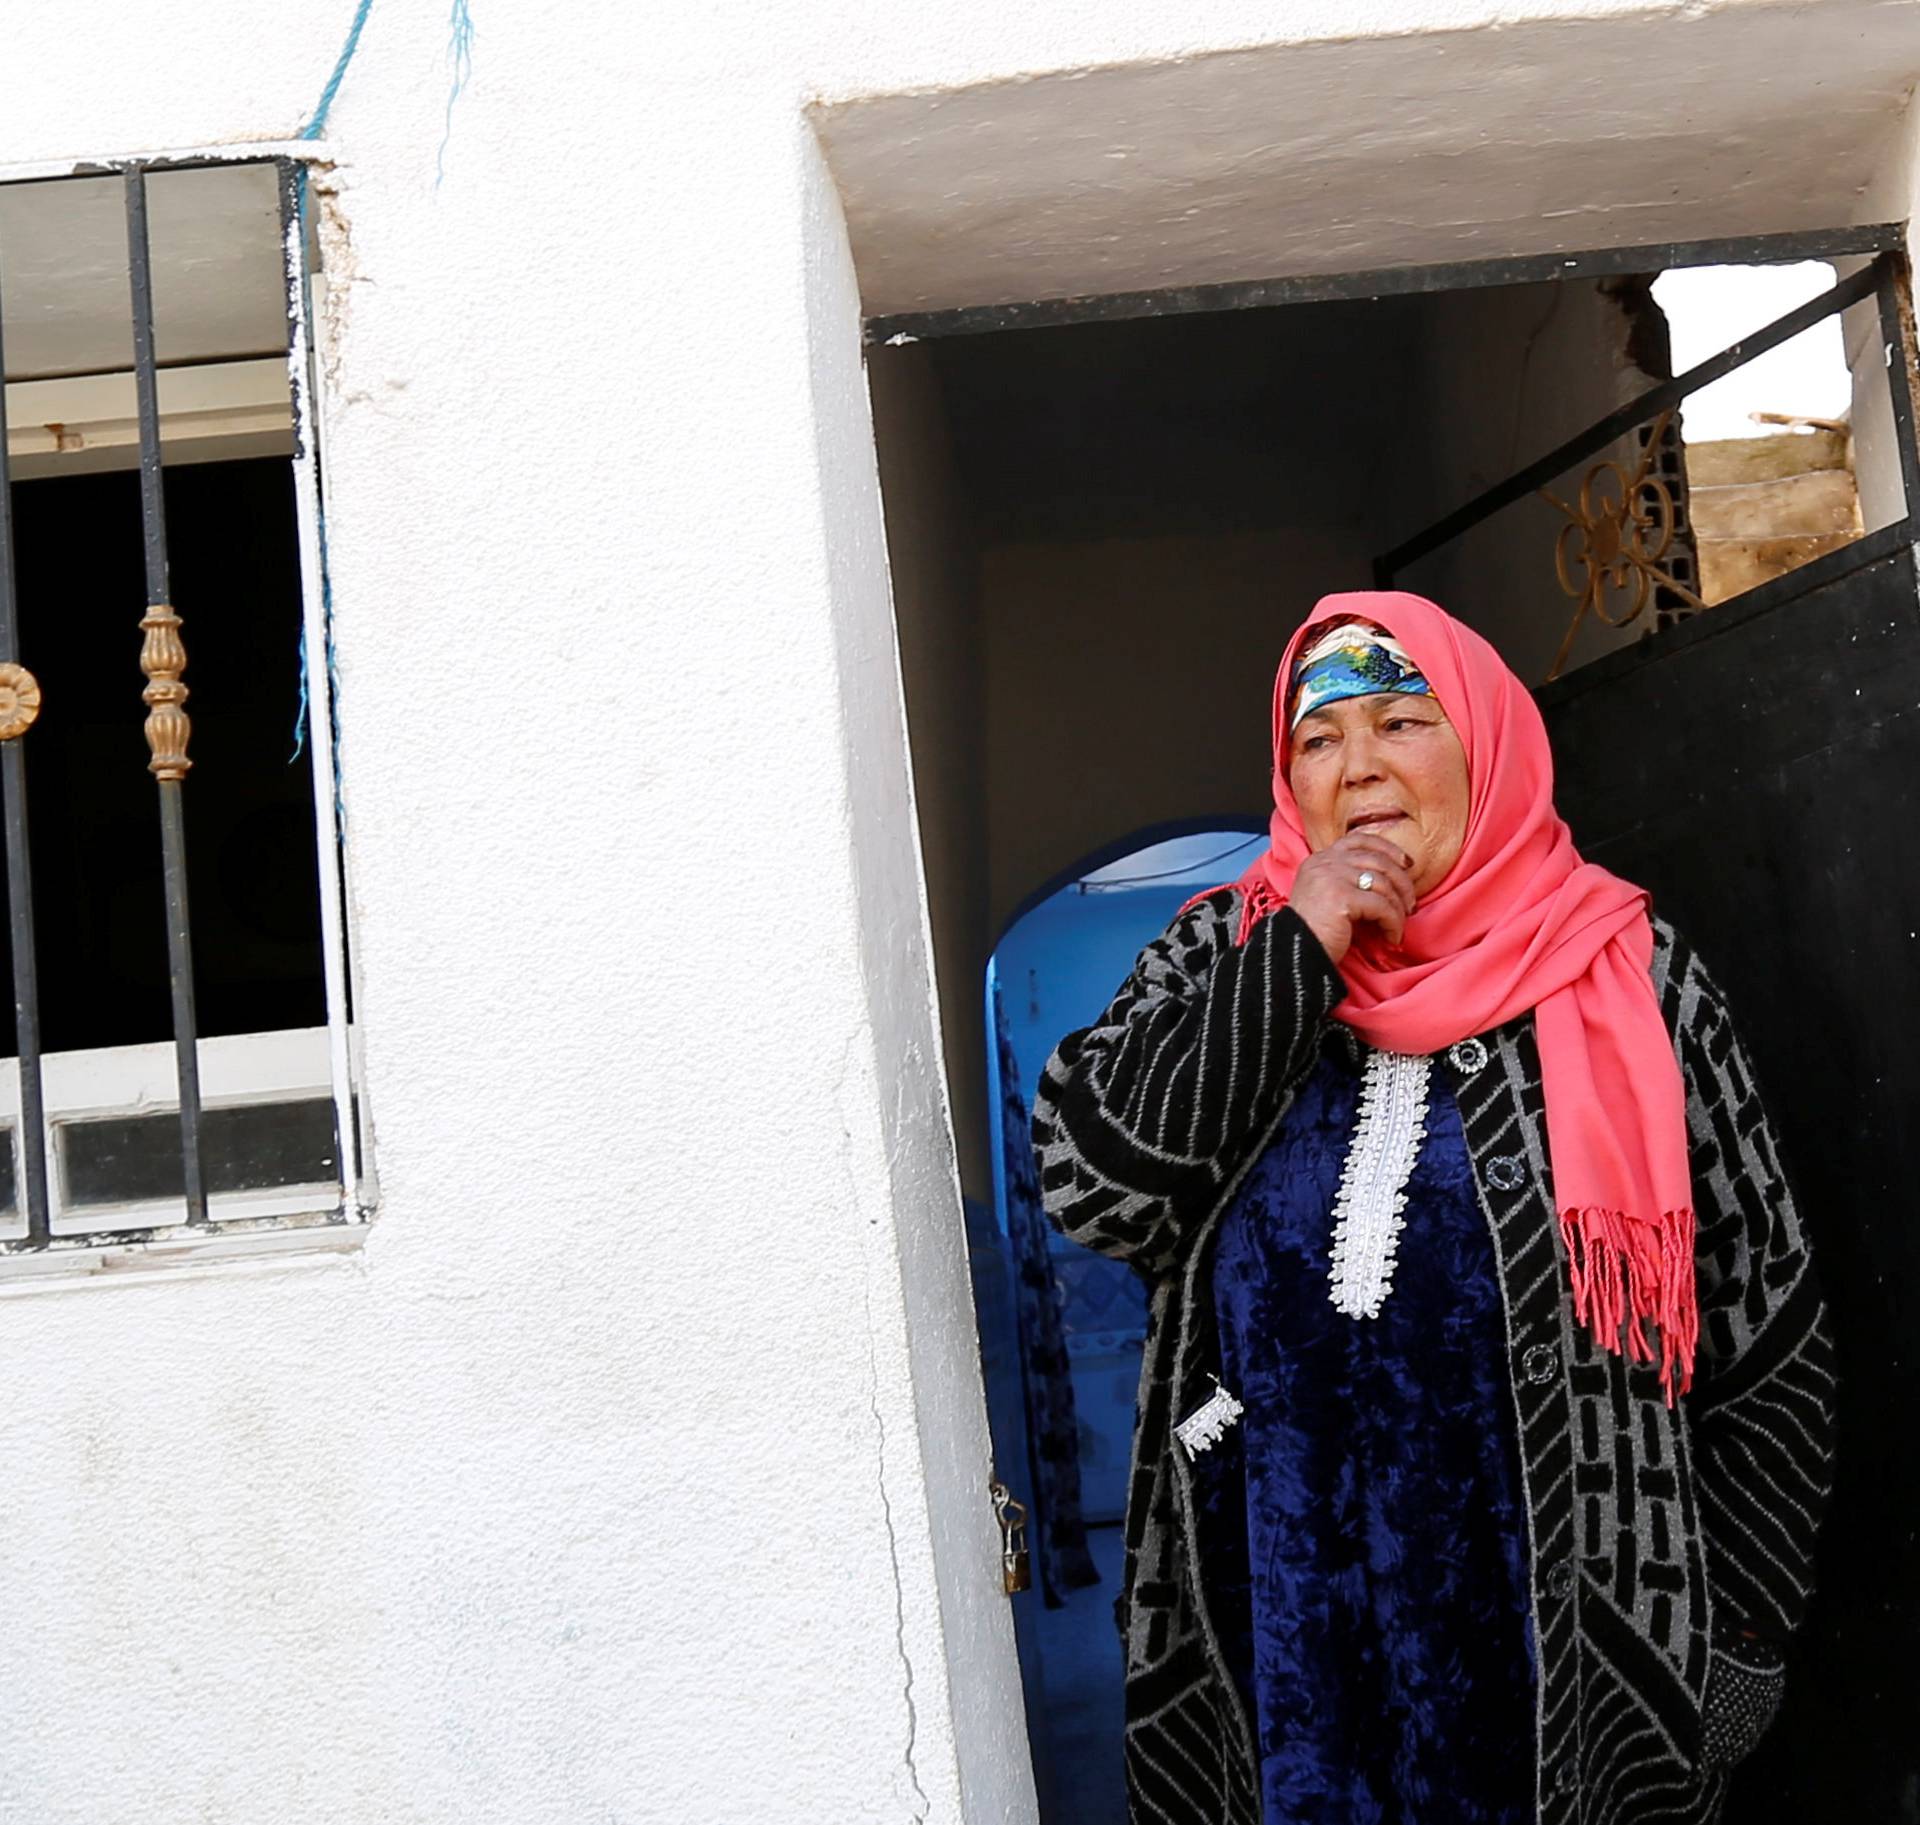 Nour, mother of suspect Anis Amri who is sought in relation with the truck attack on a Christmas market in Berlin, reacts near their home in Oueslatia, Tunisia